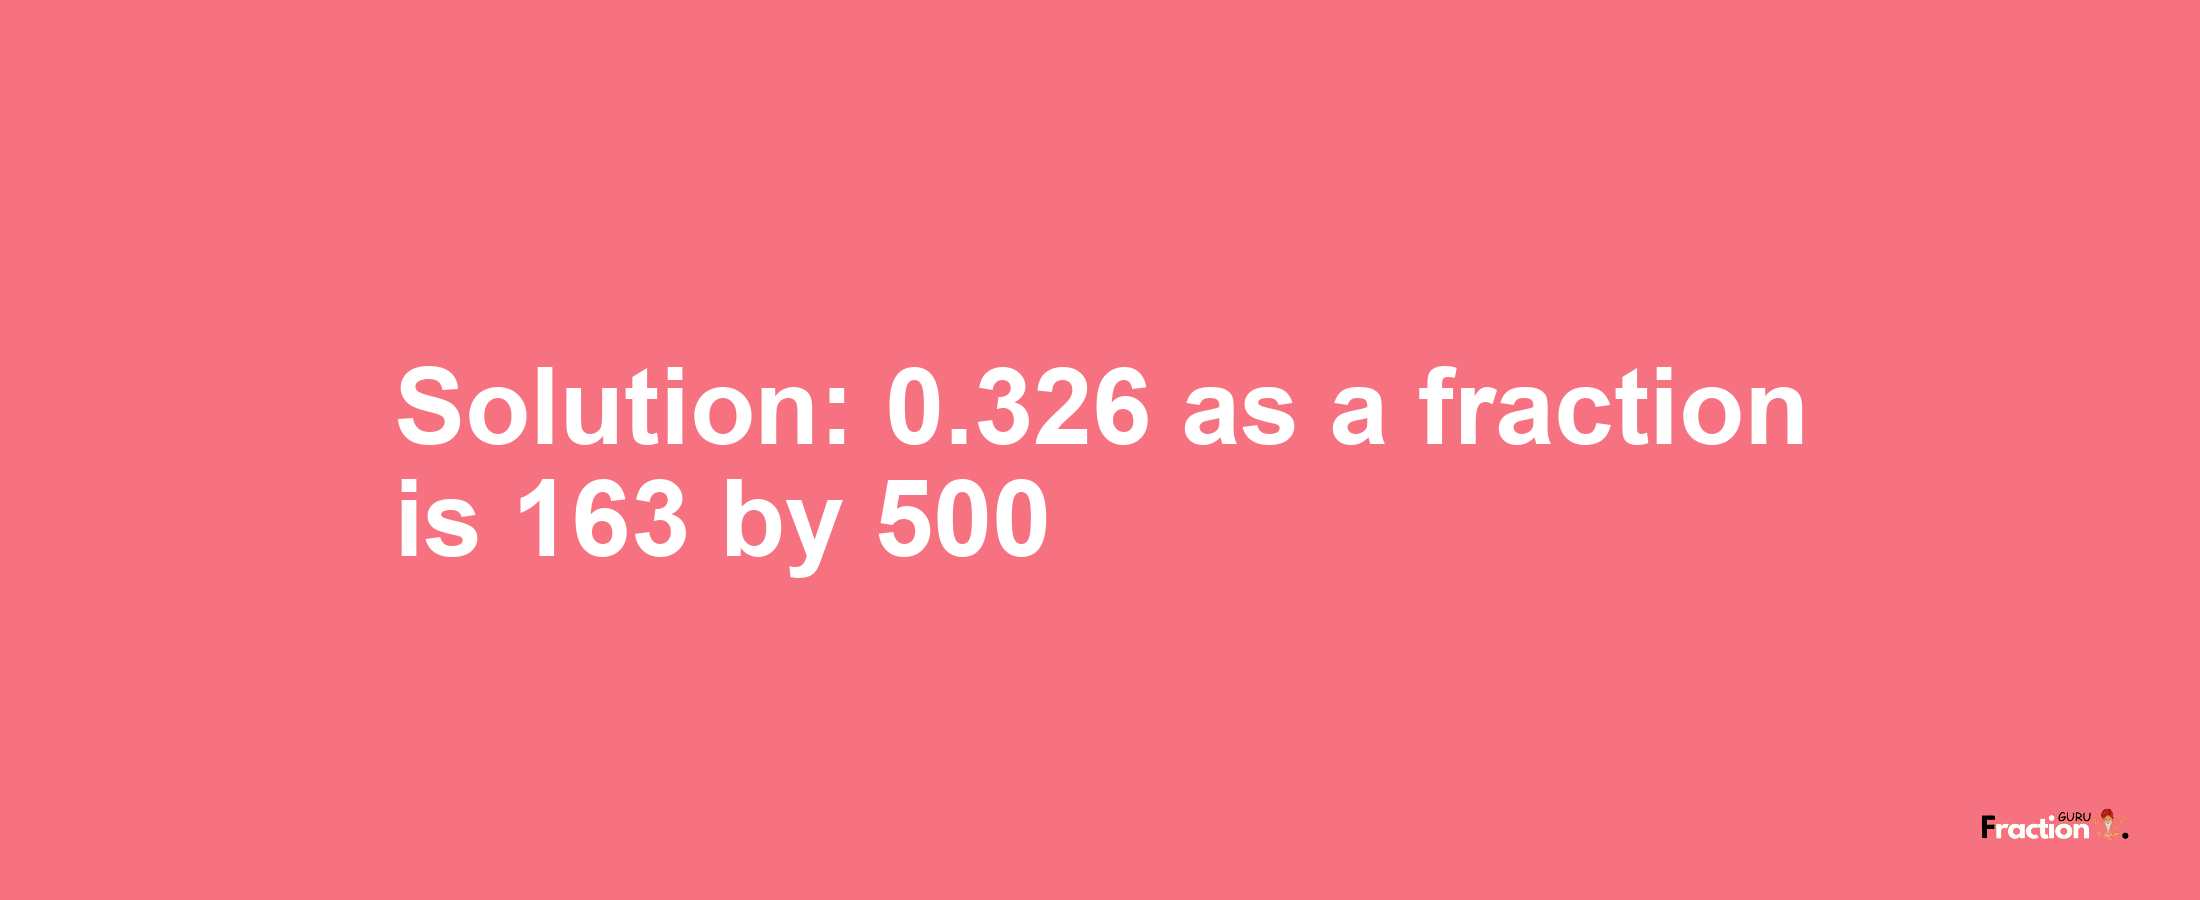 Solution:0.326 as a fraction is 163/500